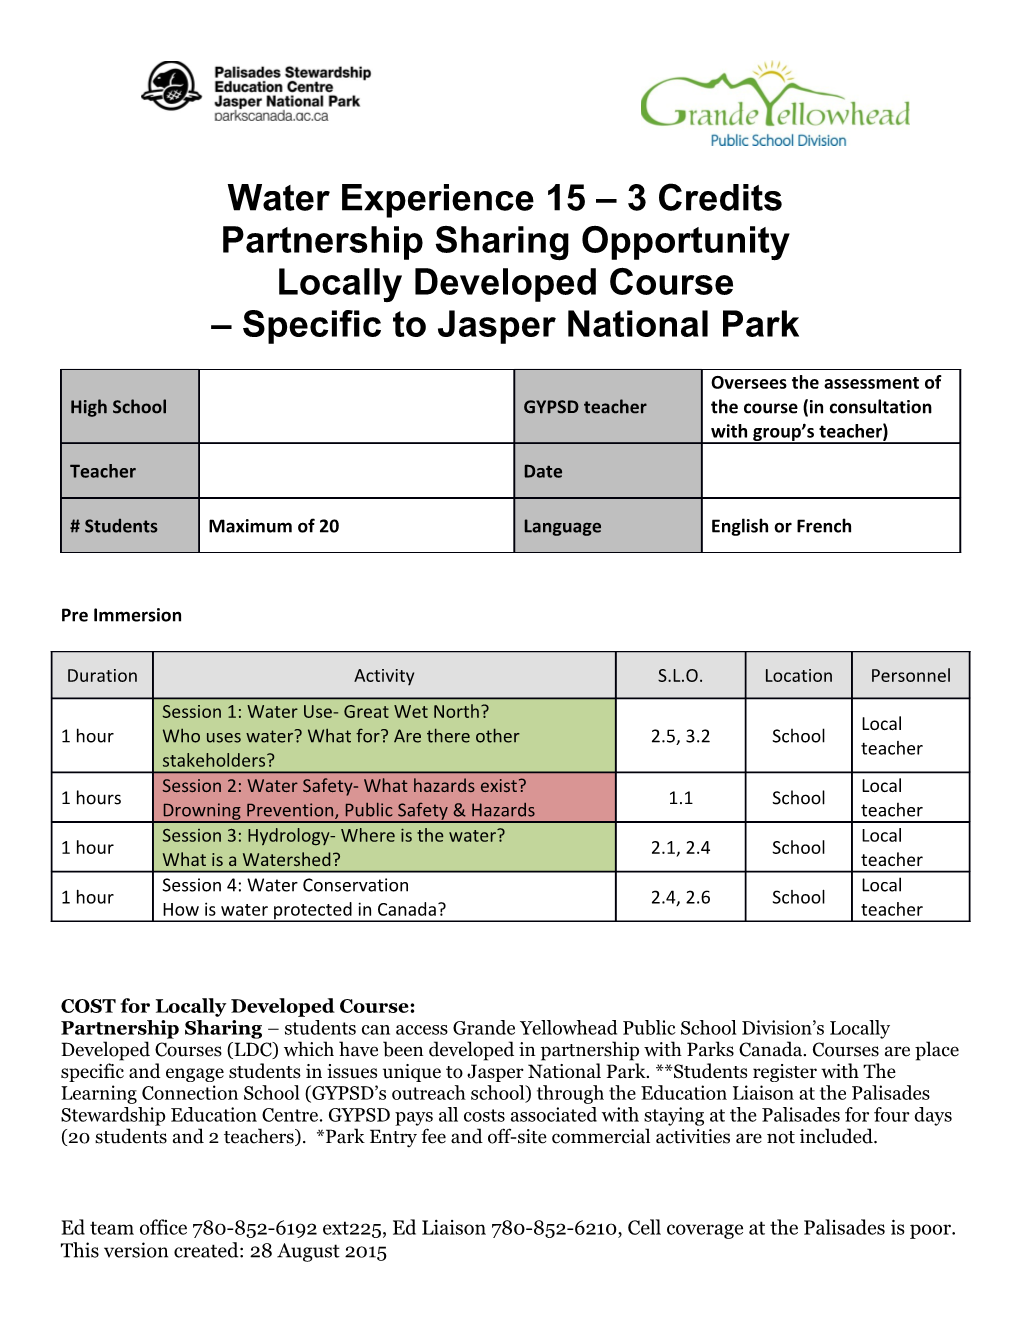 Water Experience 15 3 Credits